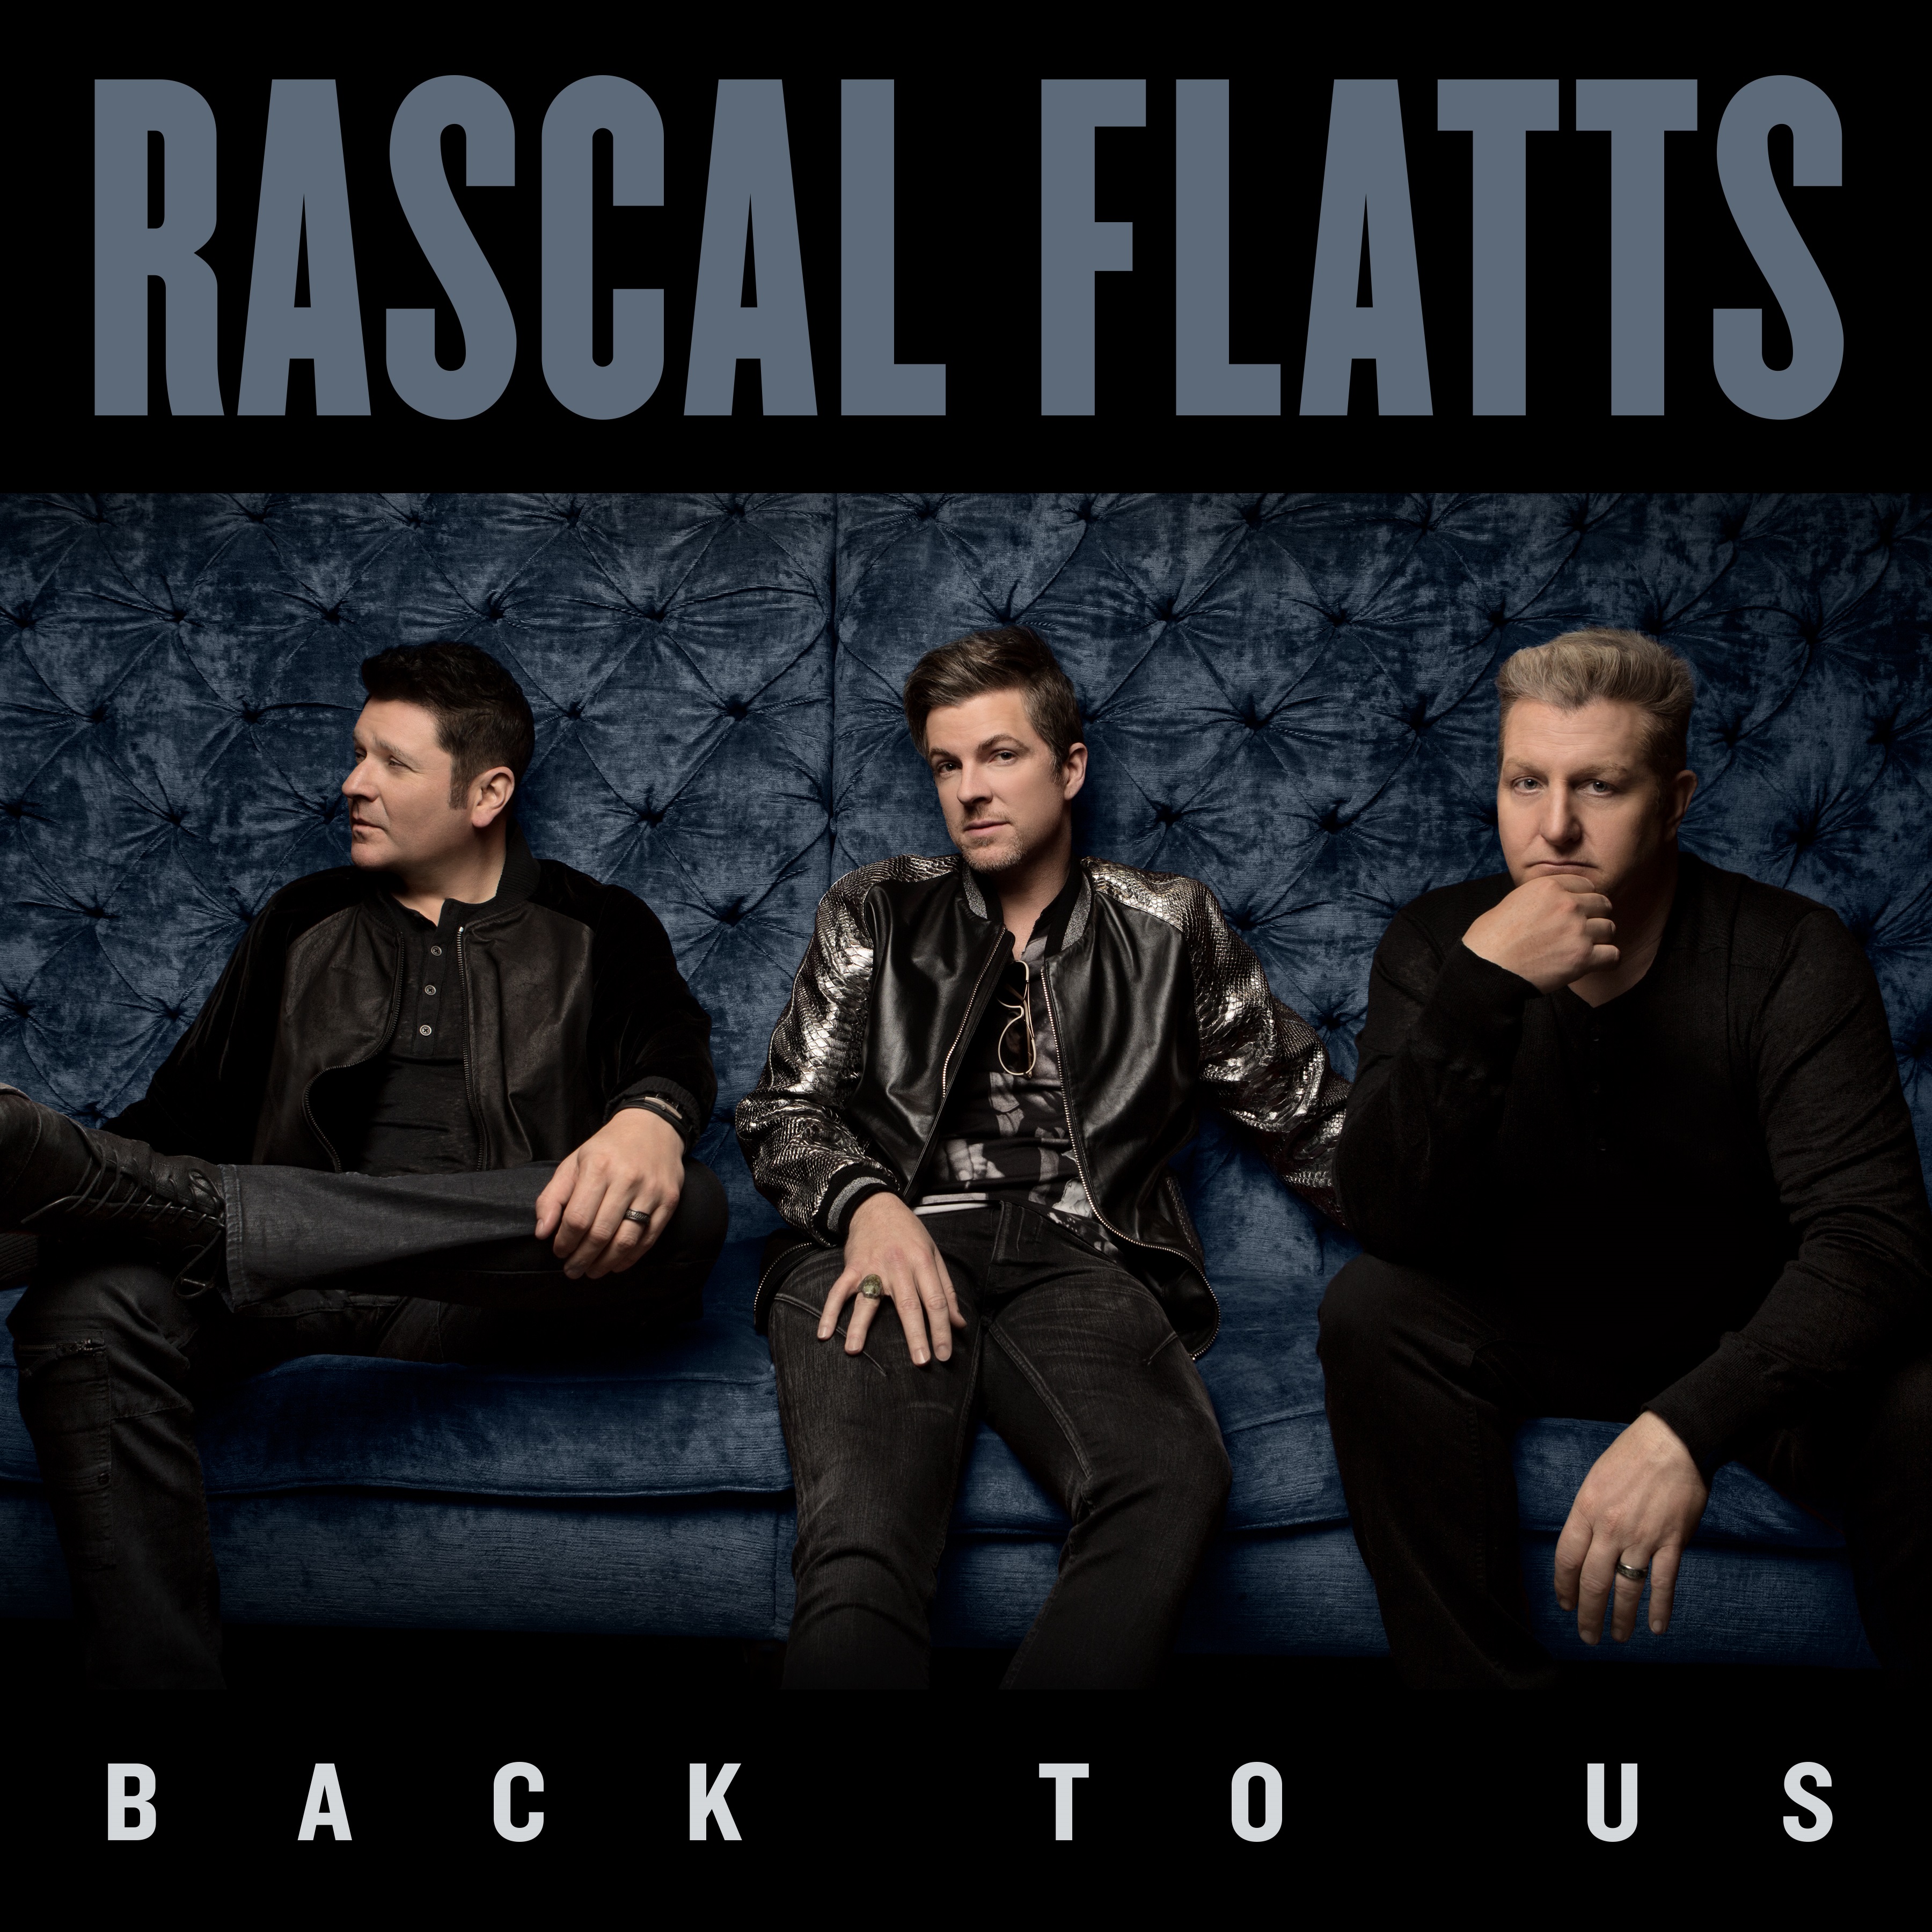 Life Is A Highway by Rascal Flatts on Amazon Music